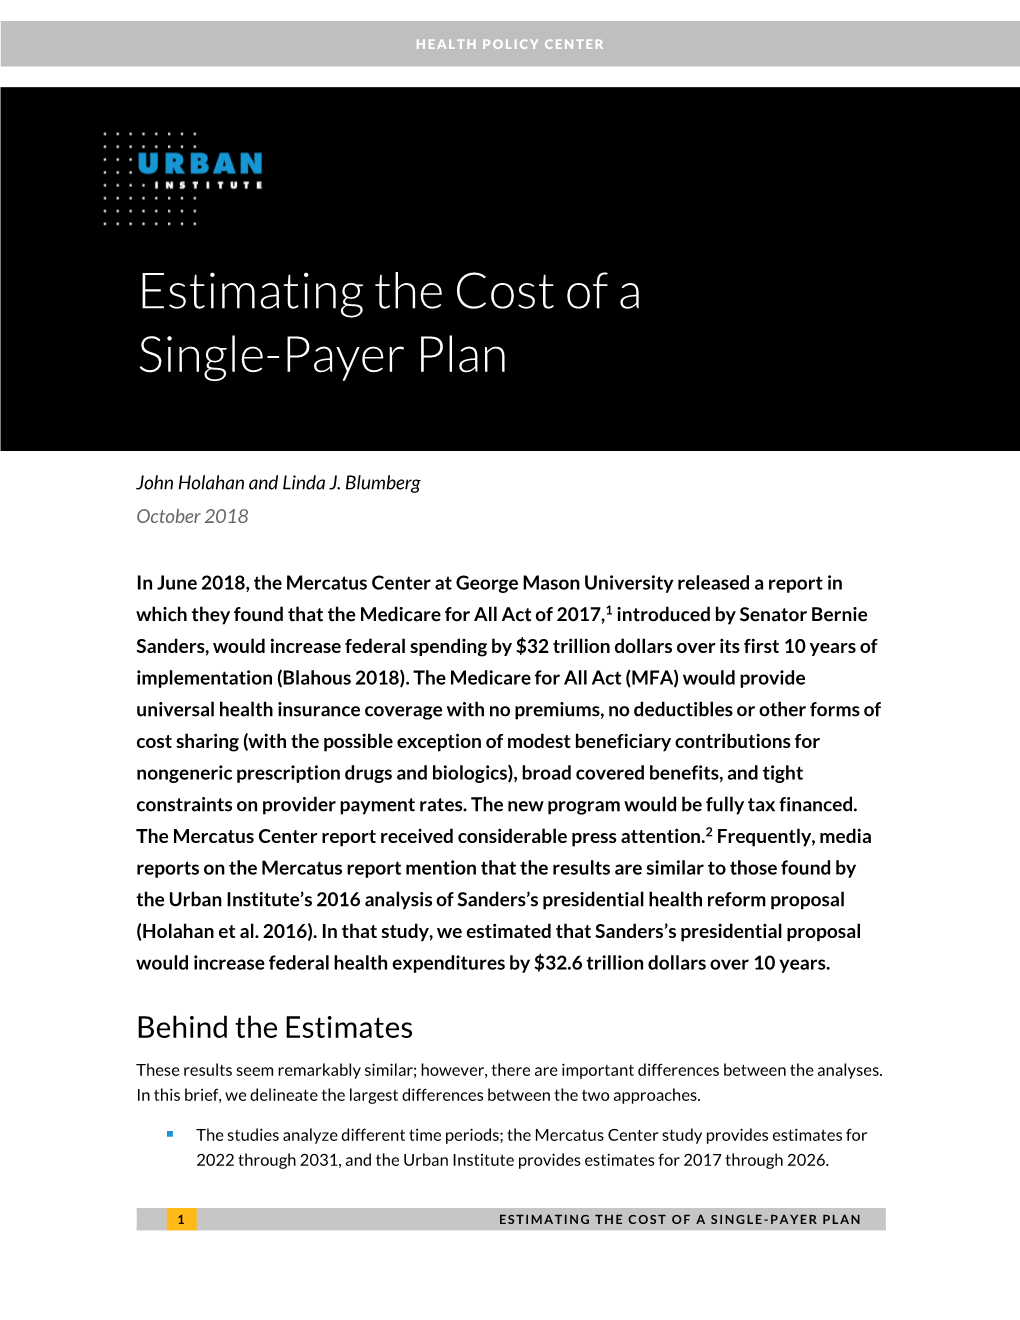 Estimating the Cost of a Single-Payer Plan